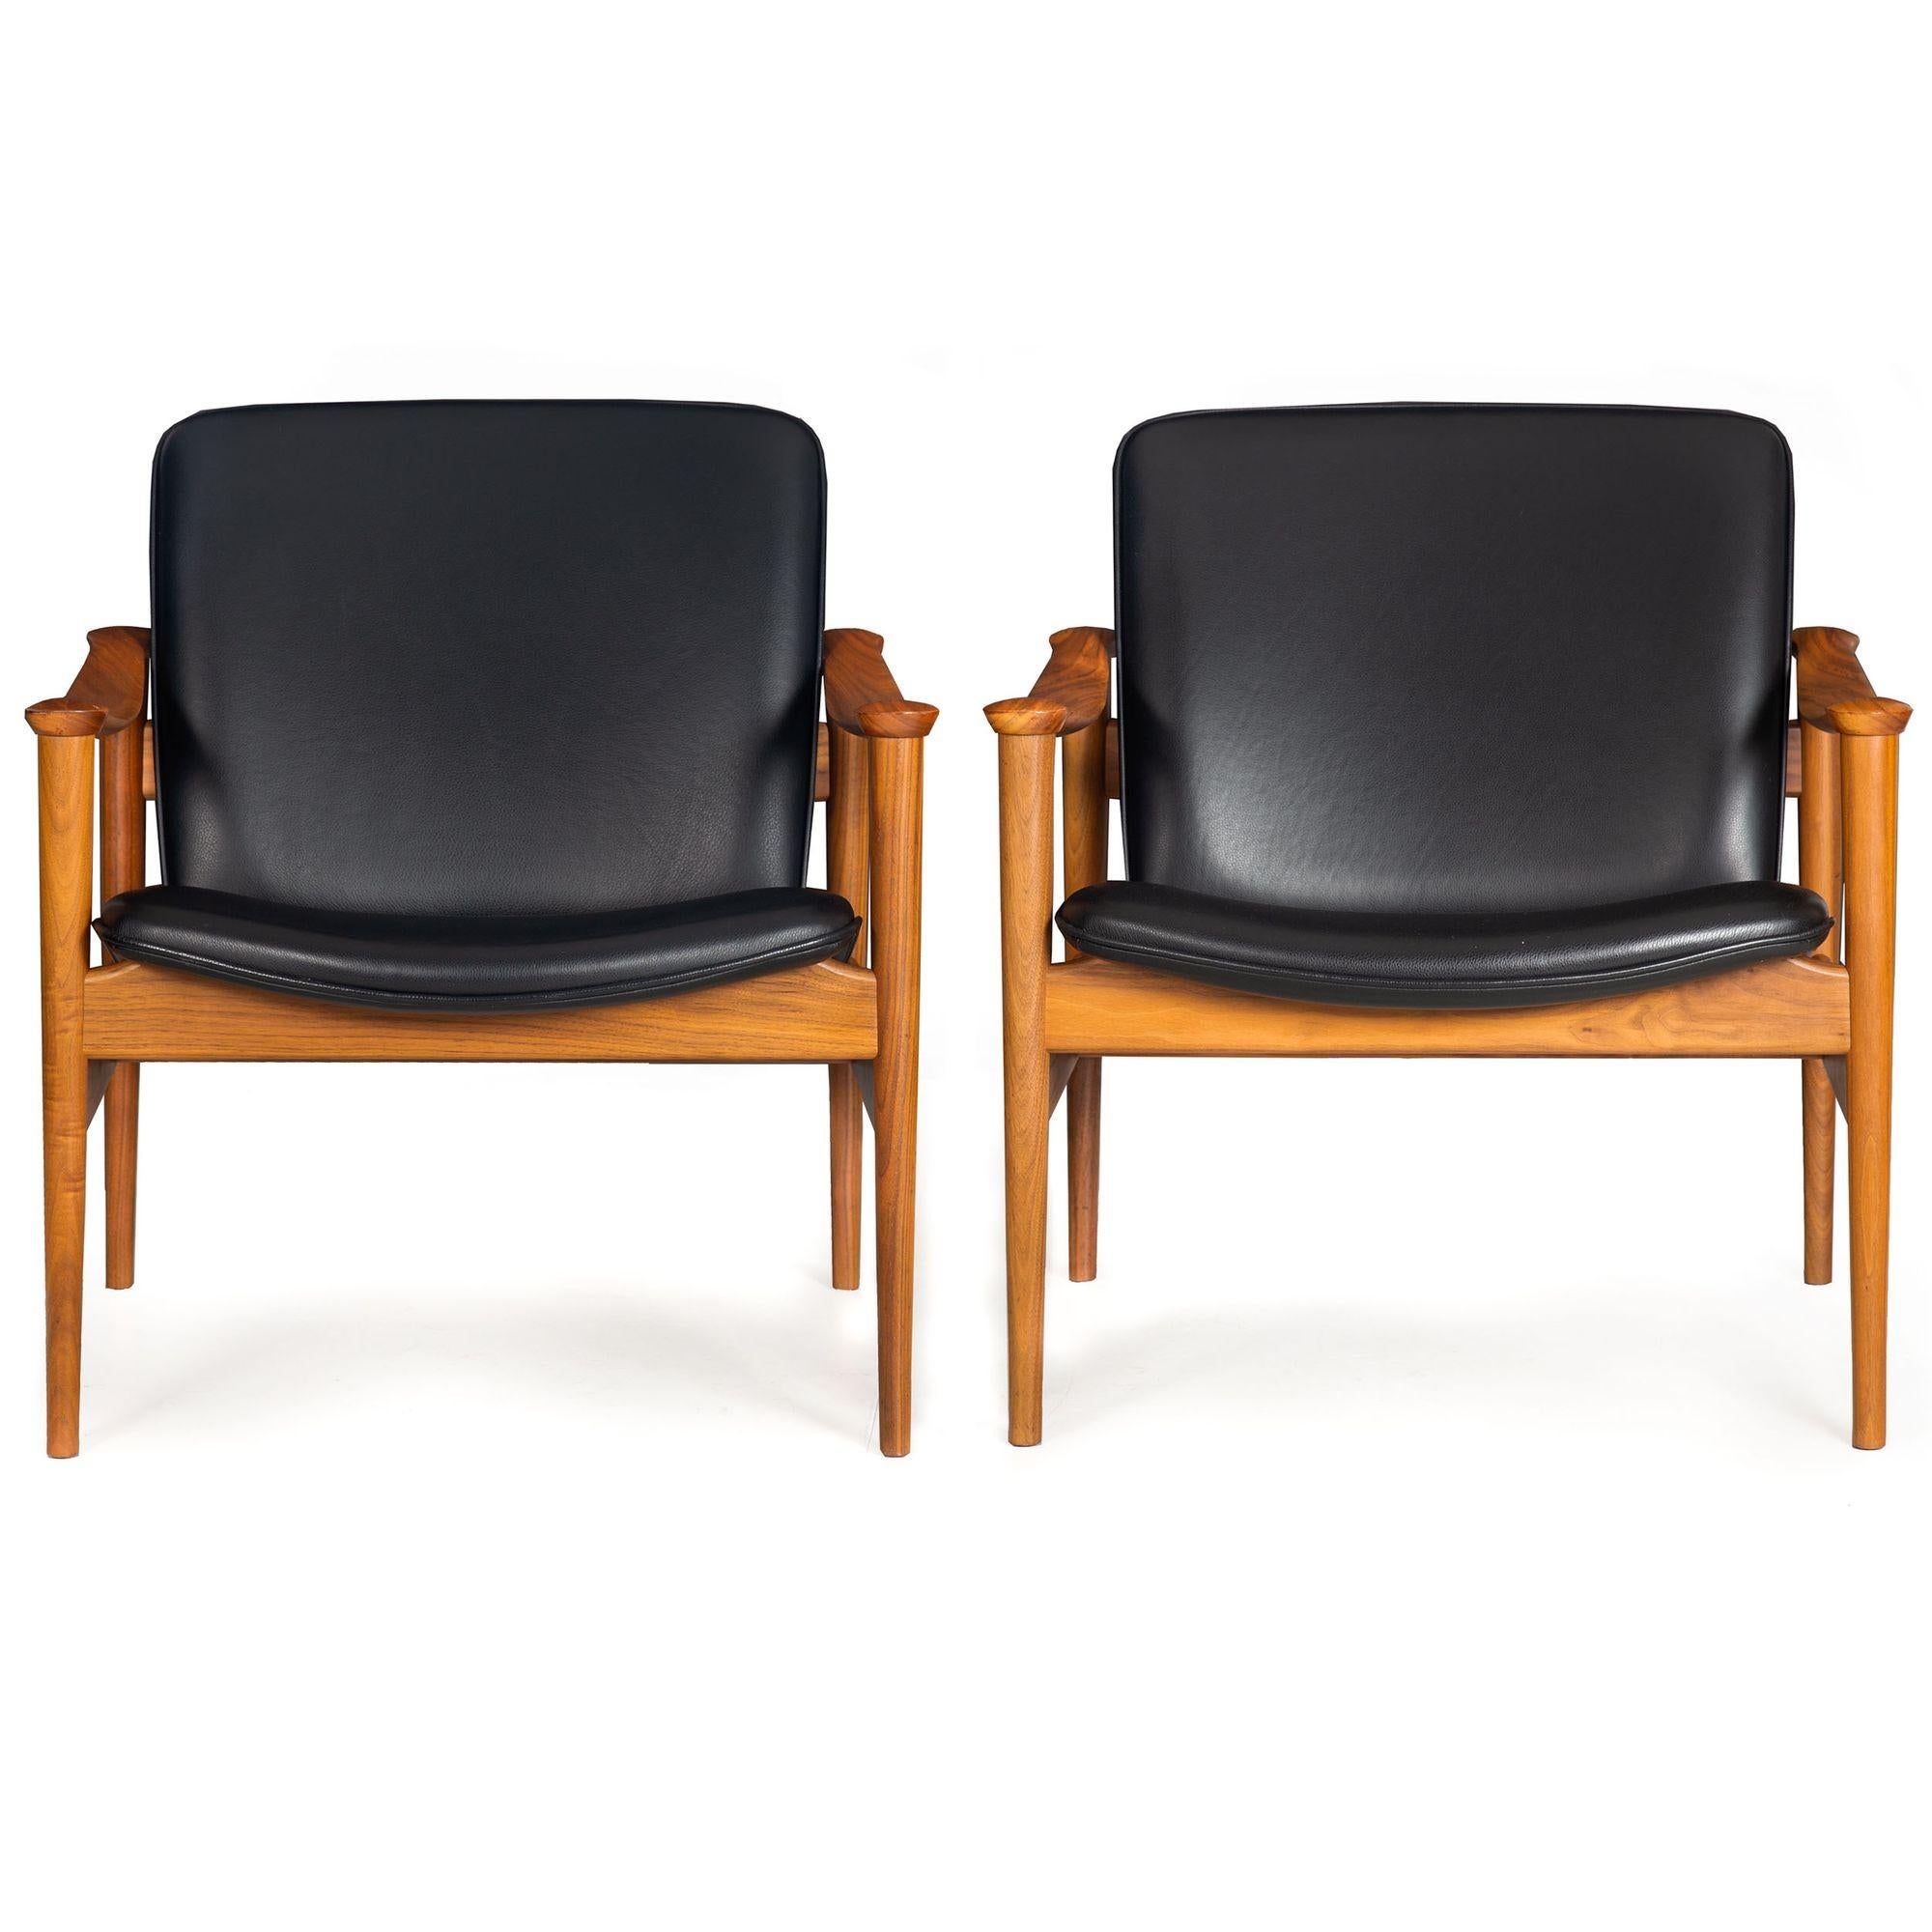 PAIR OF SCULPTED WALNUT MODEL NO. 711 LOUNGE CHAIRS
Designed by Frederik Kayser in 1961, produced by LK Hjelle, Norway, ca. 21st century  retails new for $ 4400-4900/each
Item # 312NWT08A

An exceedingly beautiful pair of chairs originally designed